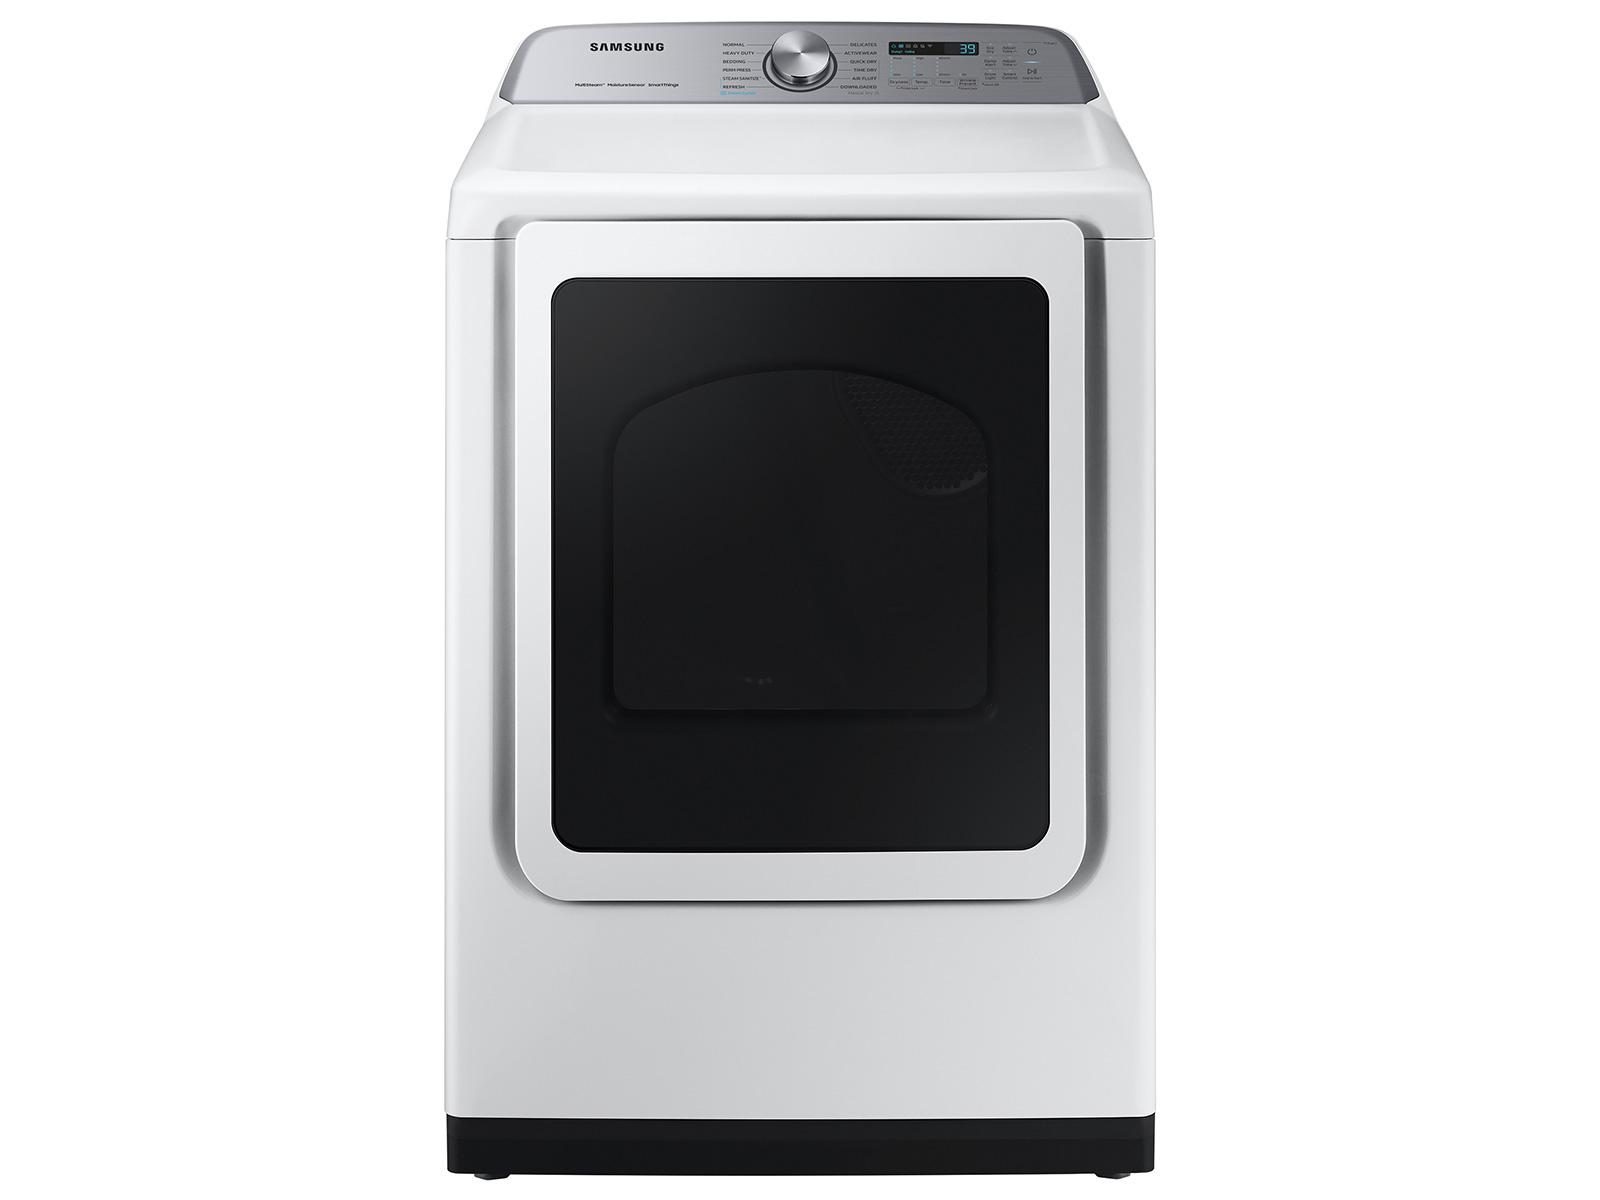 Photos - Tumble Dryer Samsung 7.4 cu. ft. Smart Electric Dryer with Steam Sanitize+ in White(DVE 